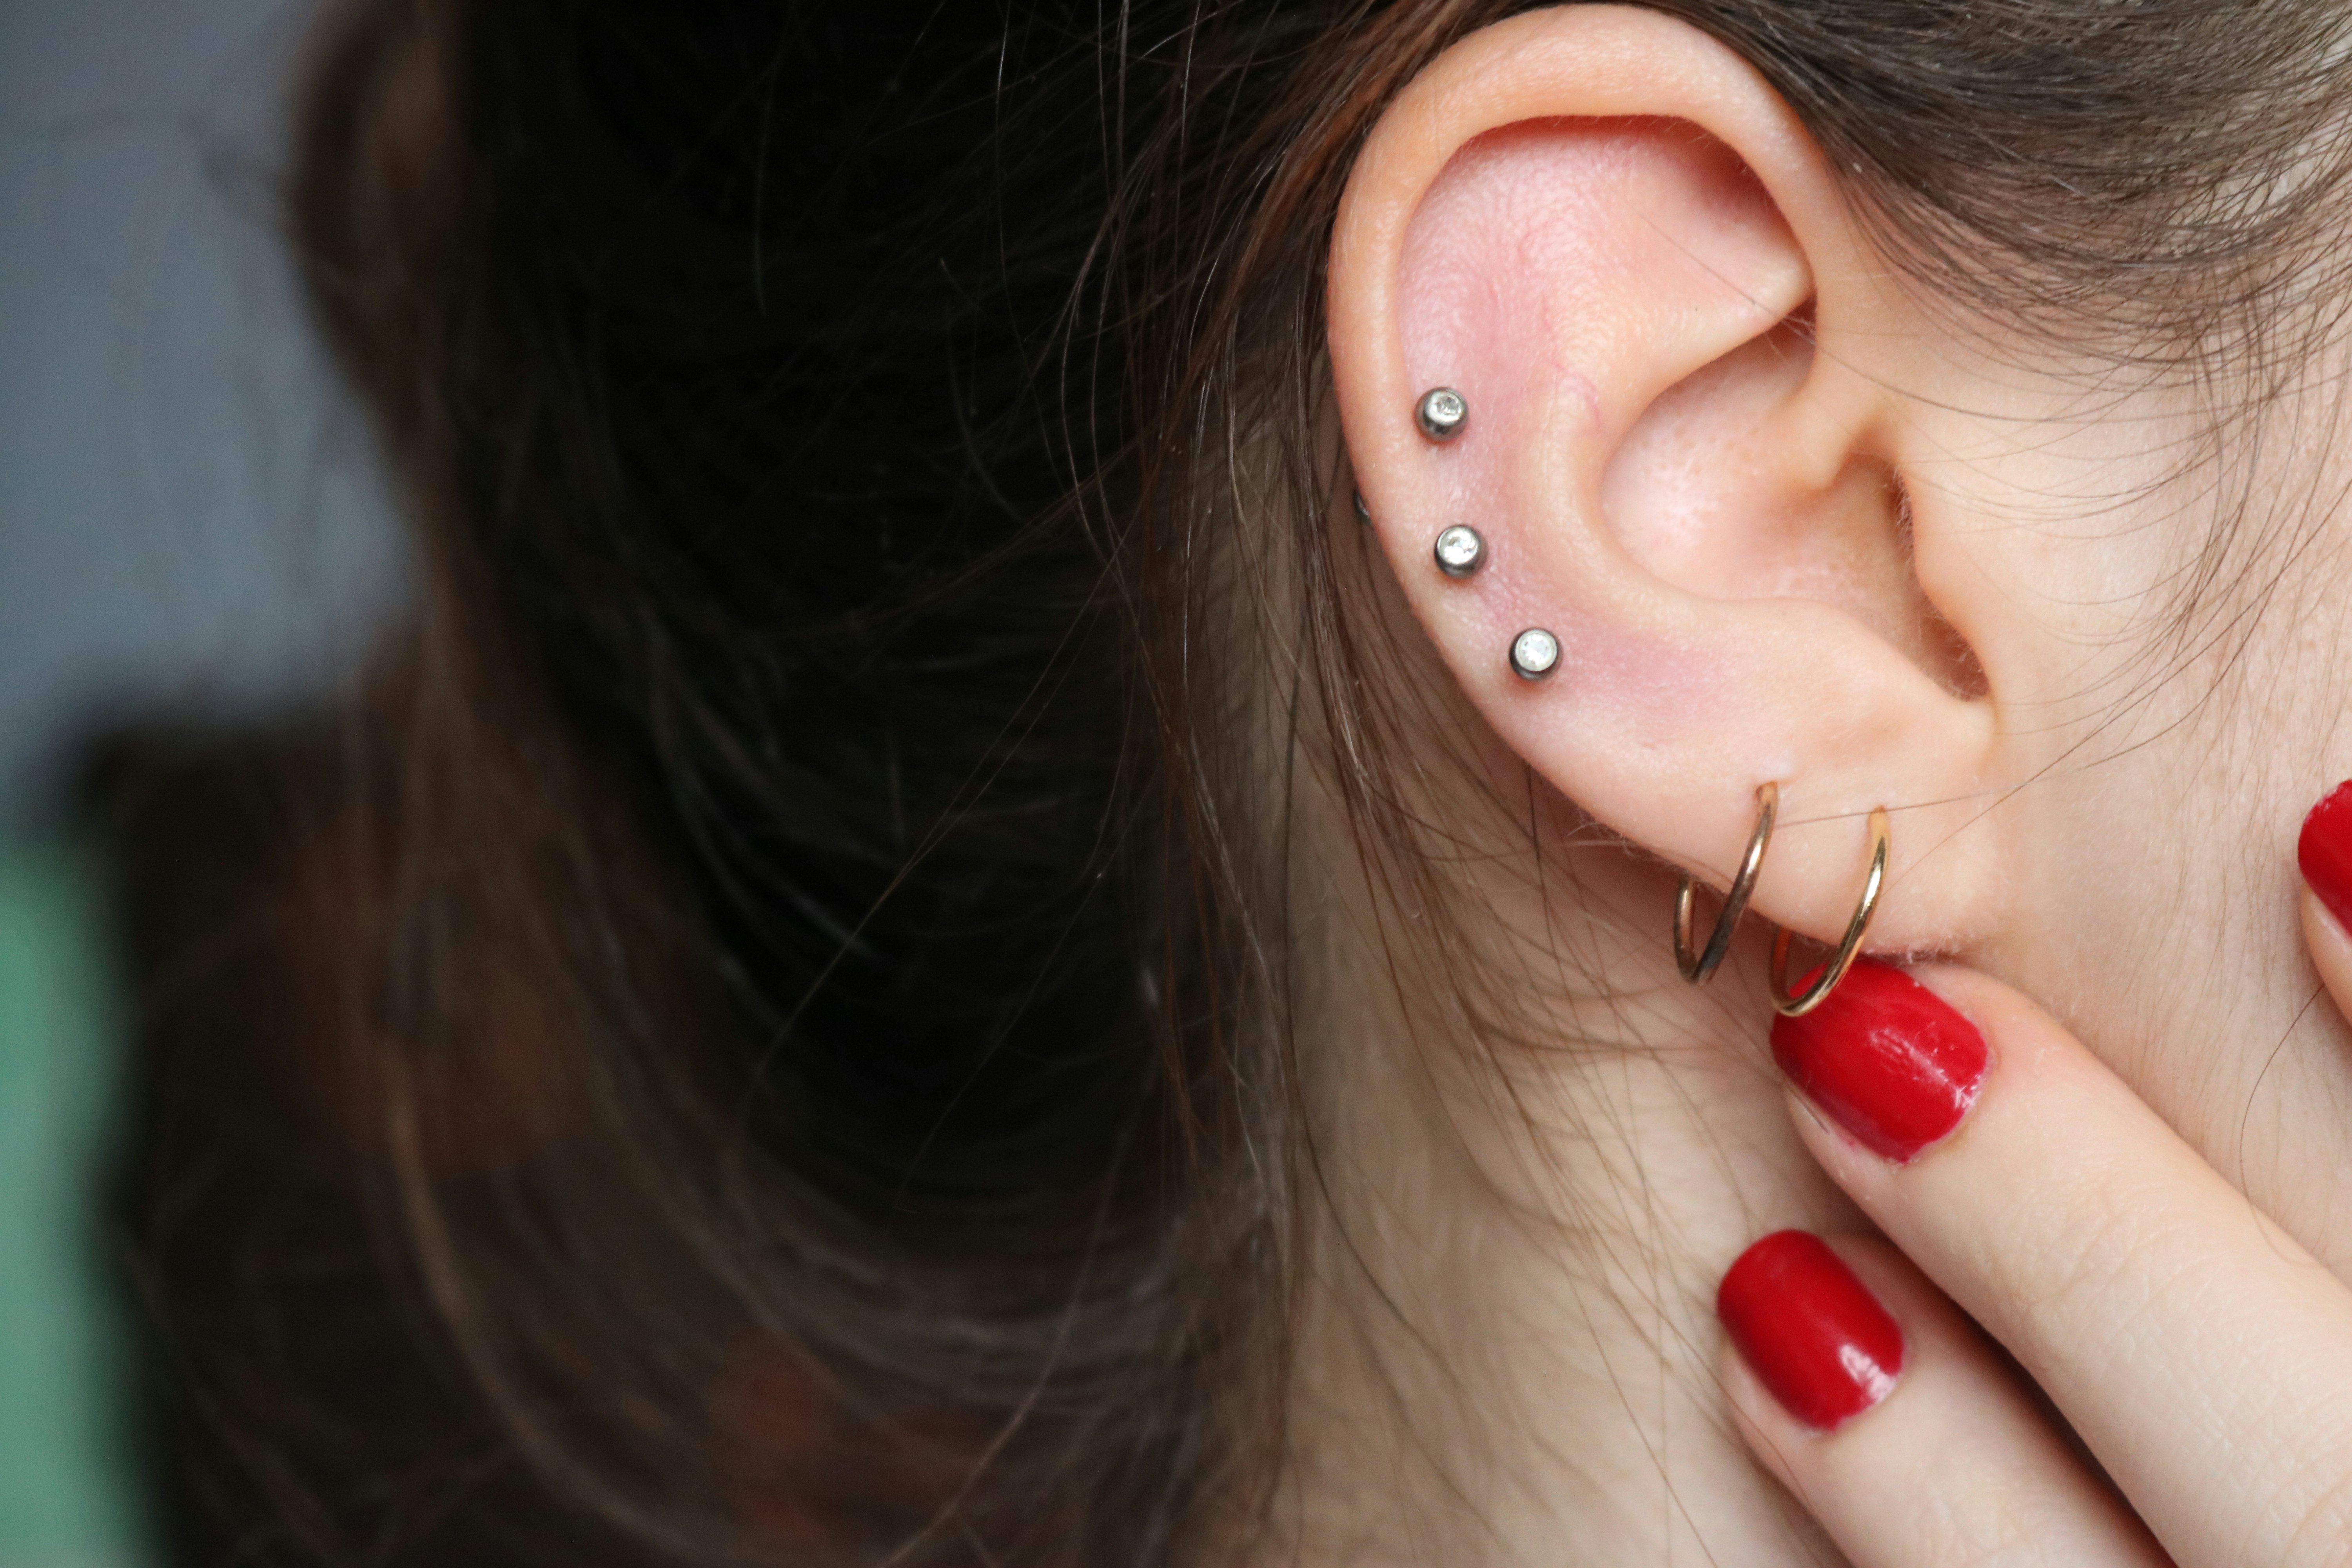 How To Pierce Your Ear At Home With A Needle